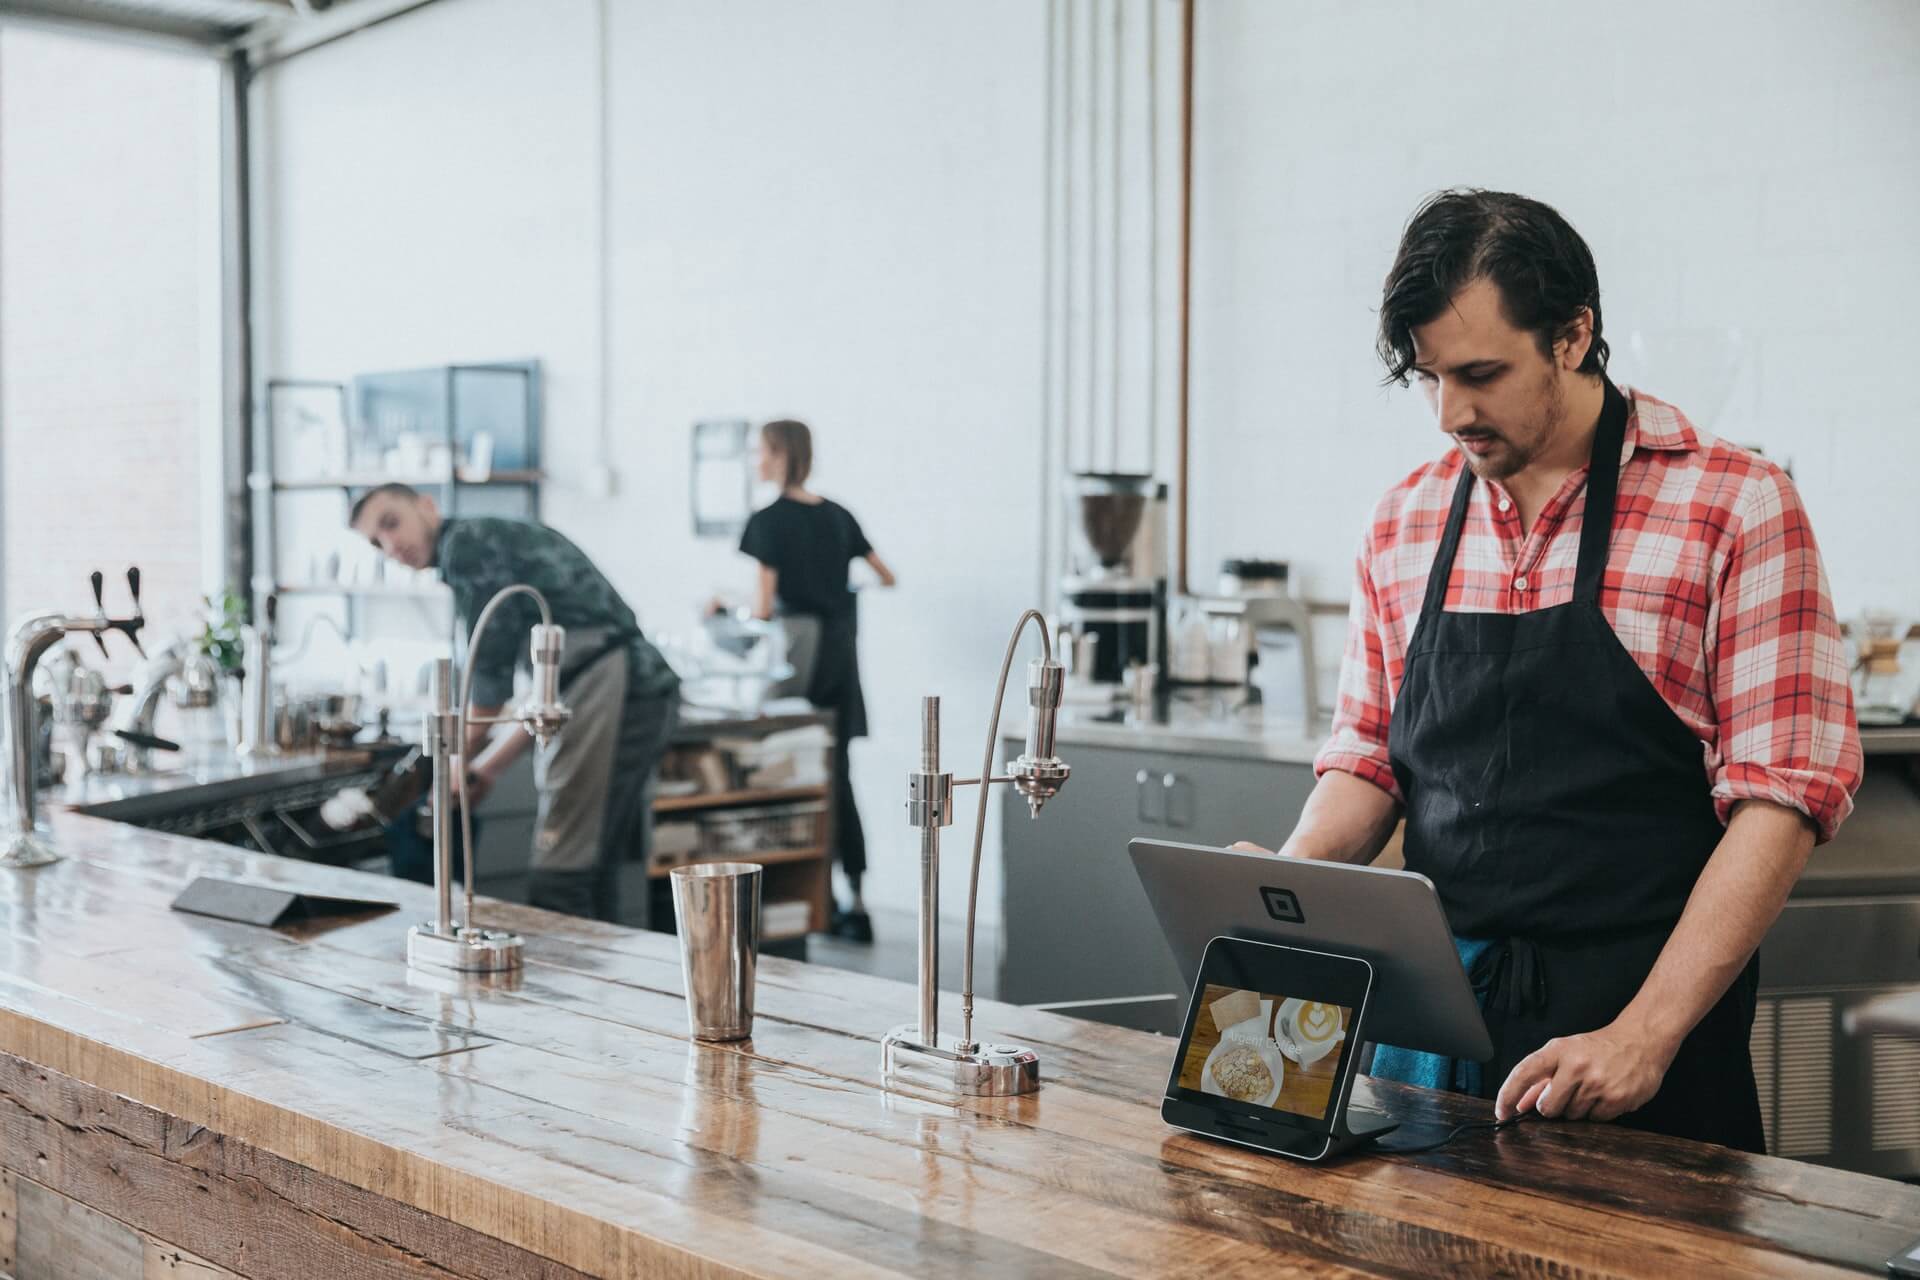 Product release: Best Open Source POS software for your small business